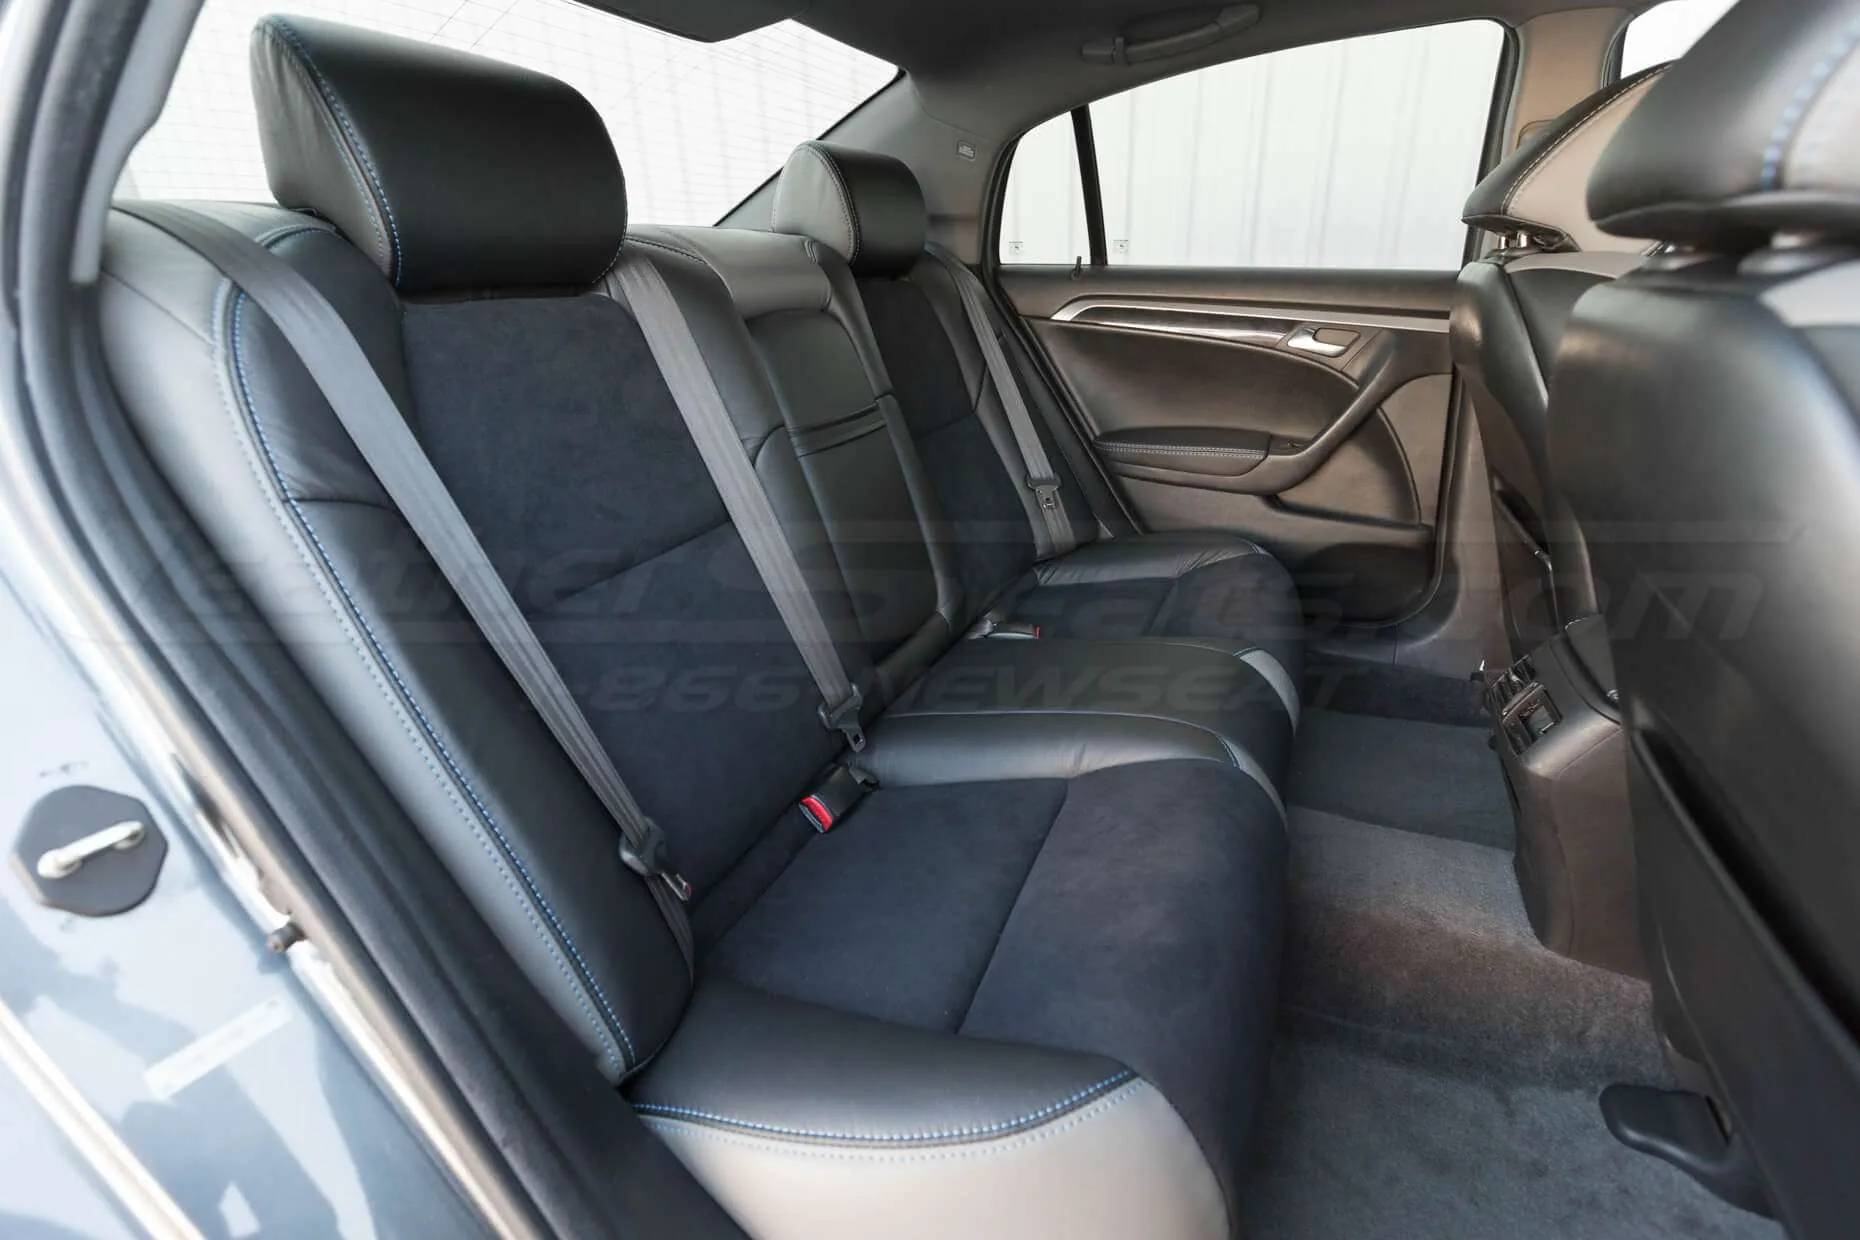 Installed Acura TL leather upholstery - rear seats